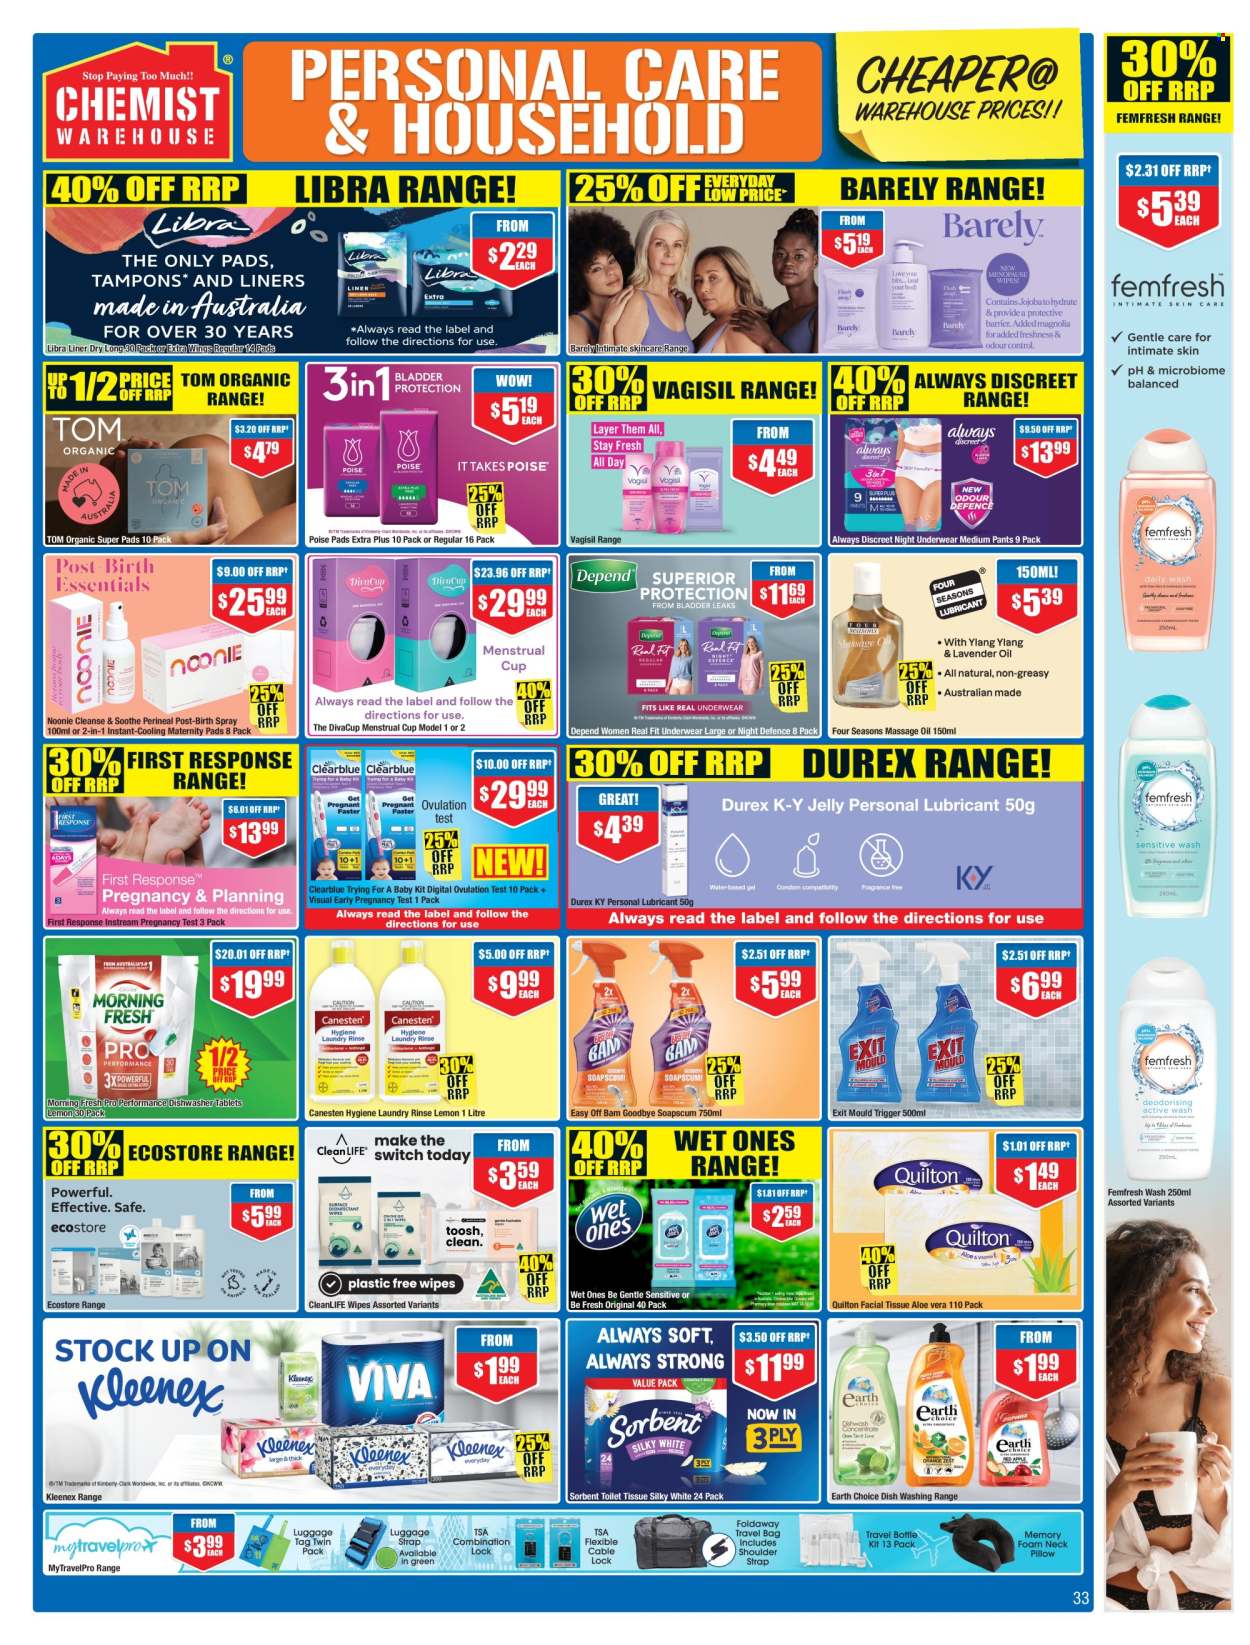 thumbnail - Chemist Warehouse Catalogue - 25 Apr 2024 - 12 May 2024 - Sales products - wipes, pants, Kleenex, toilet paper, Quilton, pads, dishwasher tablets, sanitary pads, Always Discreet, Poise, menstrual cup, feminine care product, facial tissues, massage oil, lubricant, pregnancy test, ovulation strip, incontinence care. Page 33.